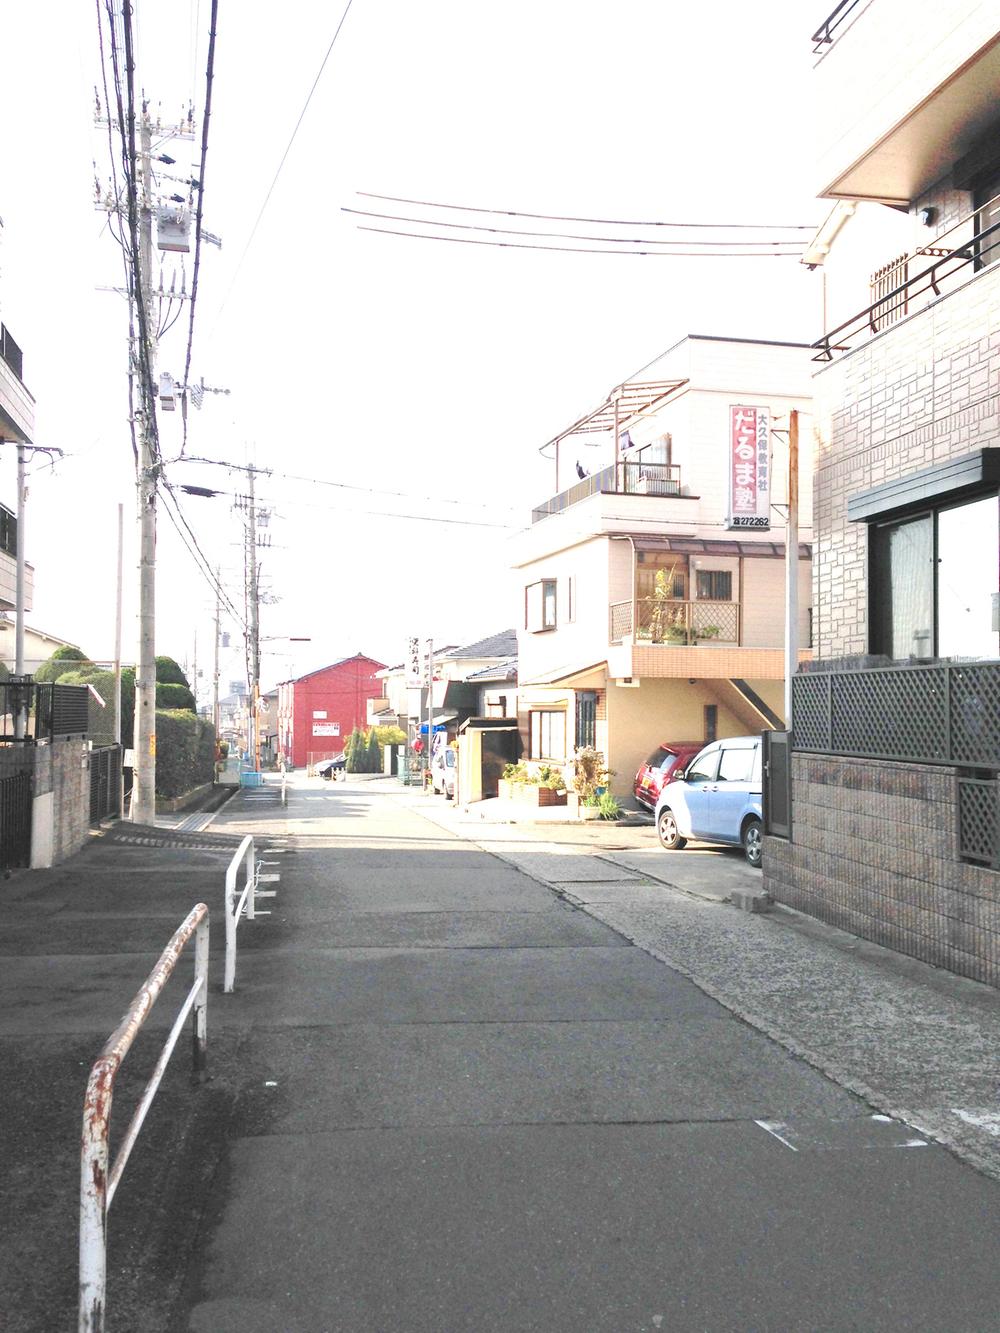 Local photos, including front road. Minamikidera north side road (east and west) west